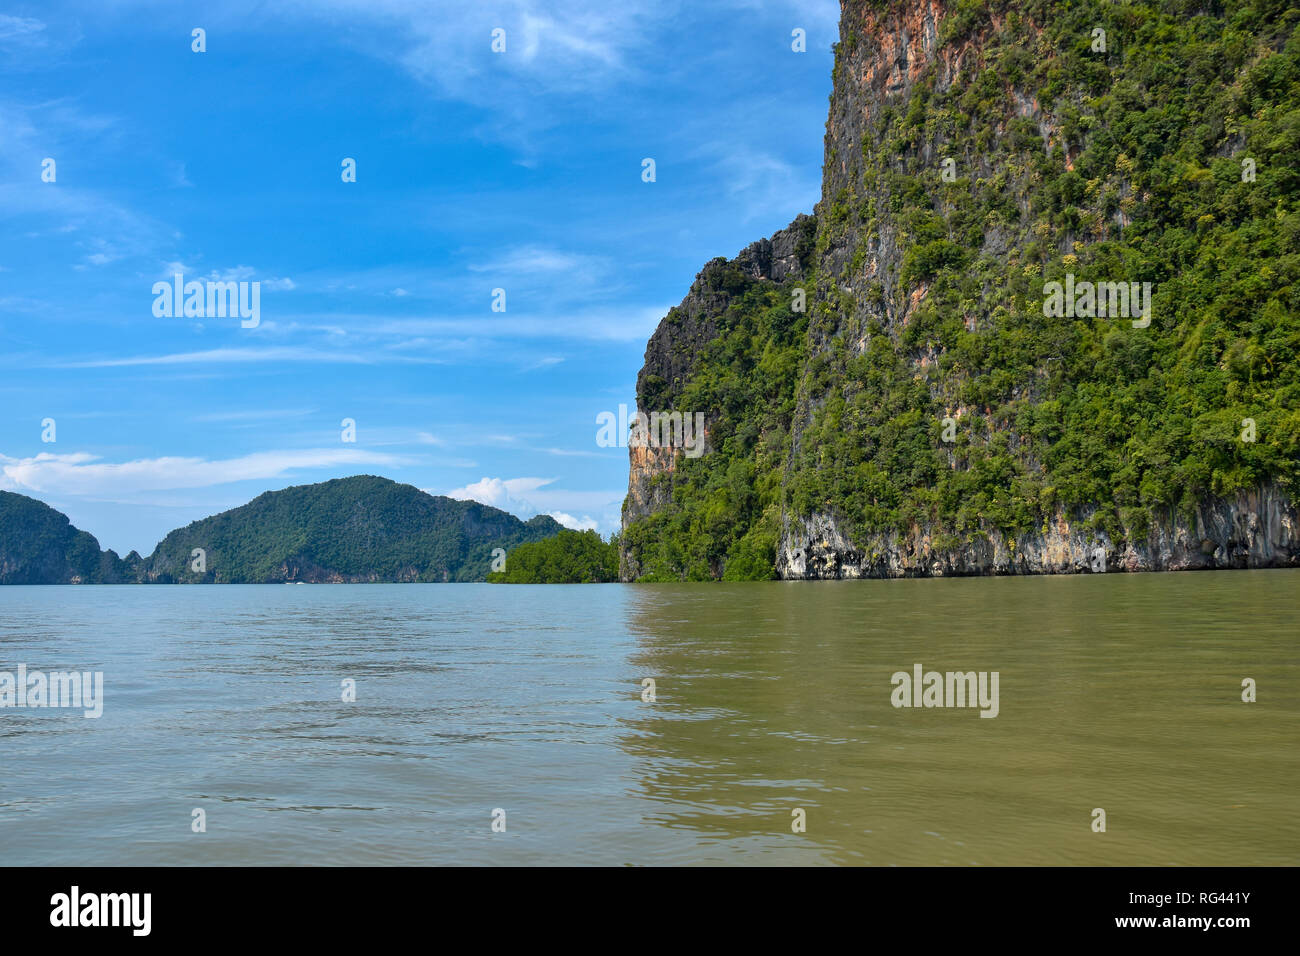 Impressive day time summer landscape with rocks in the water near James Bond Island, Thailand. Stock Photo